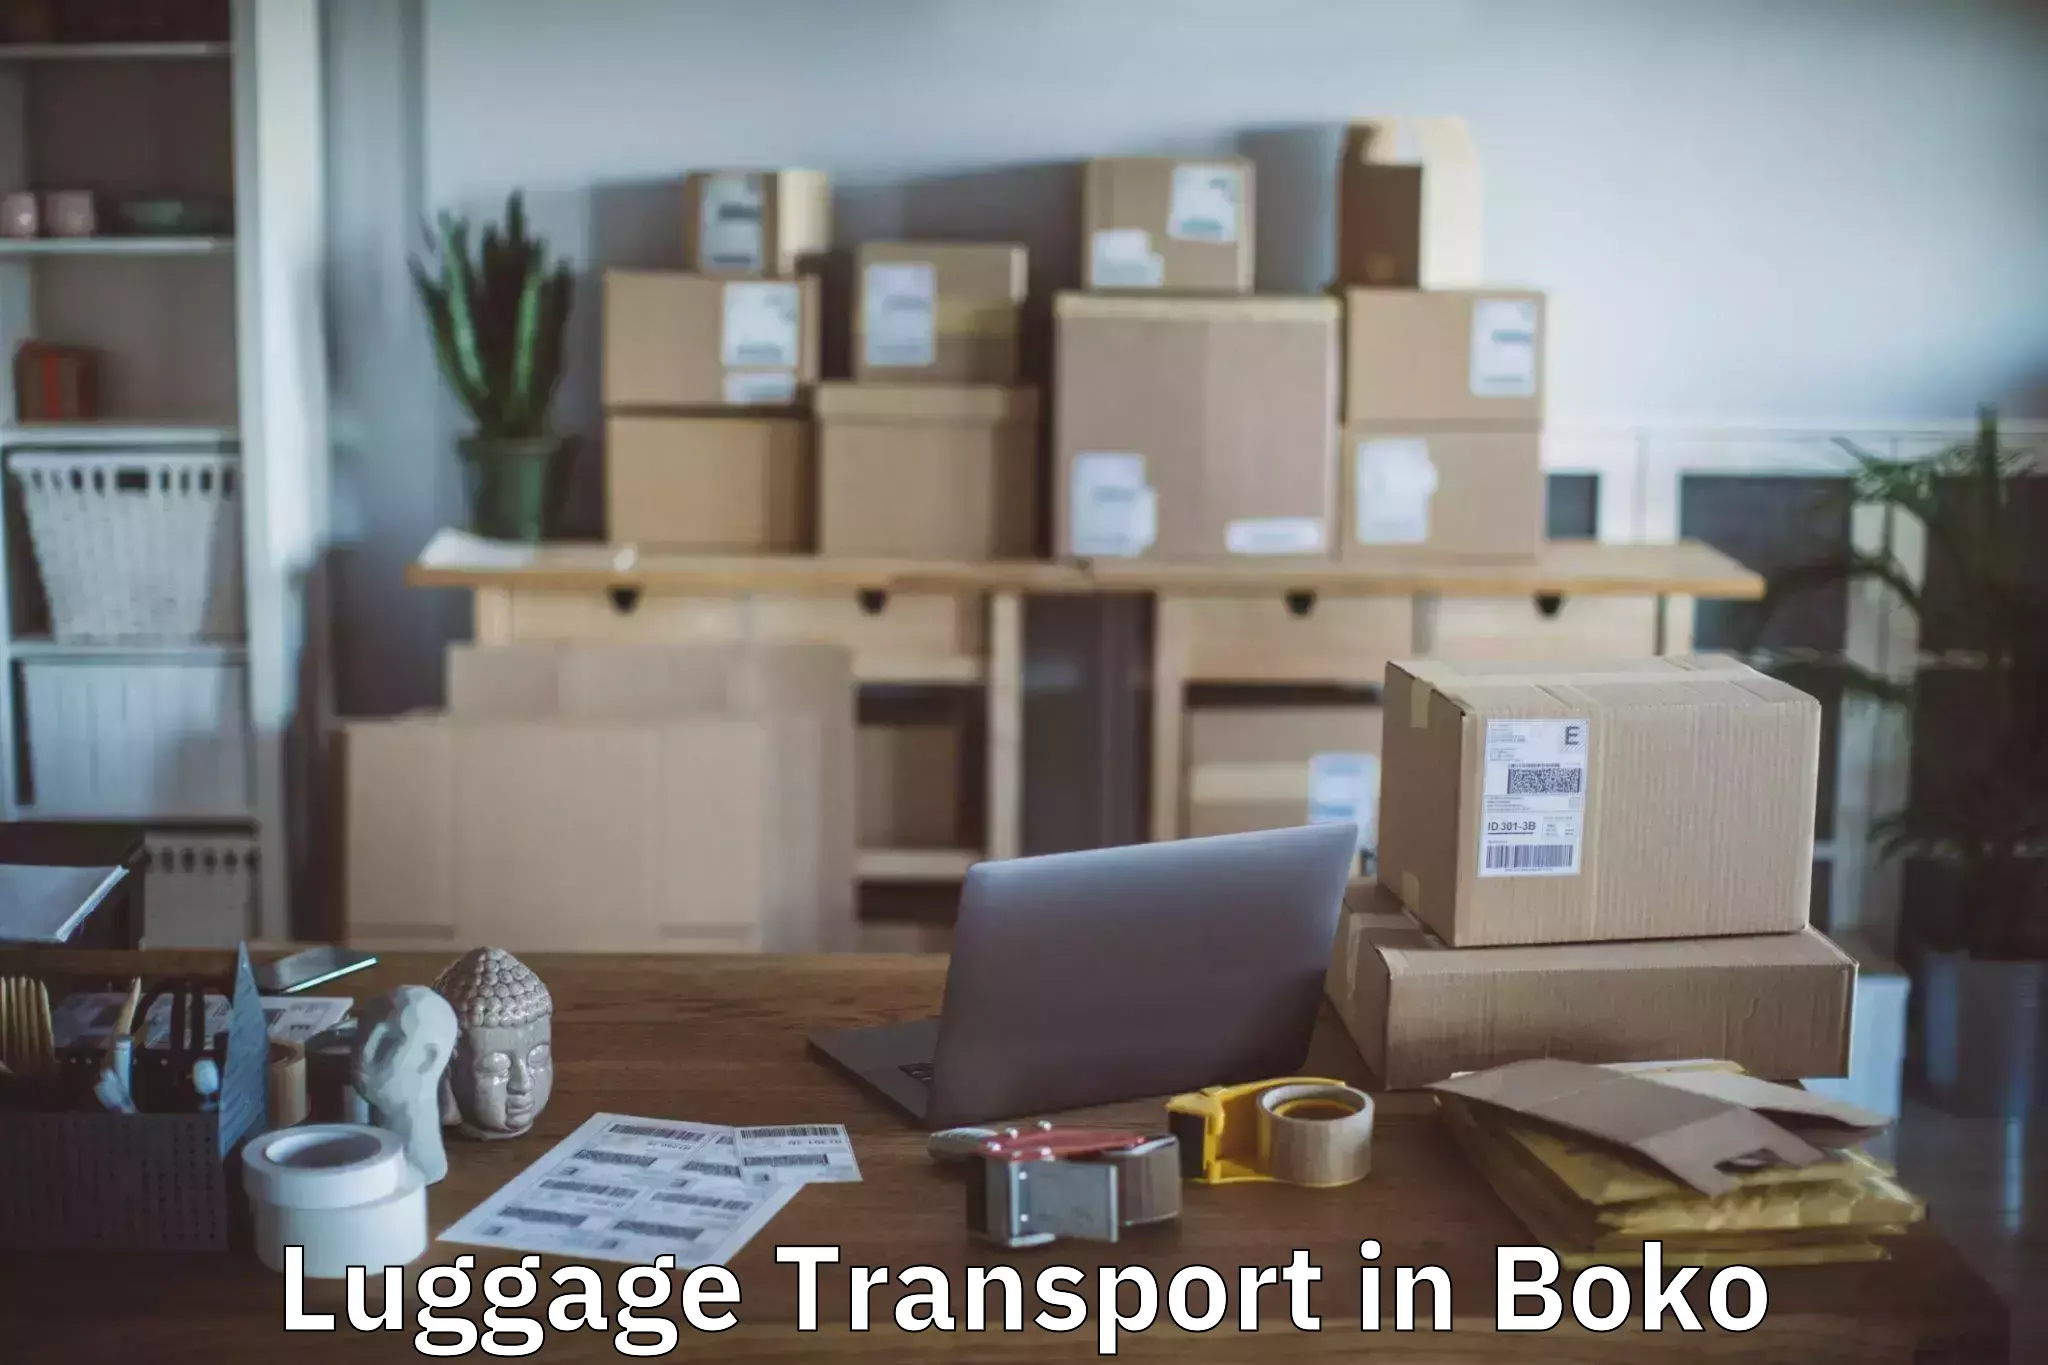 Luggage shipping trends in Boko